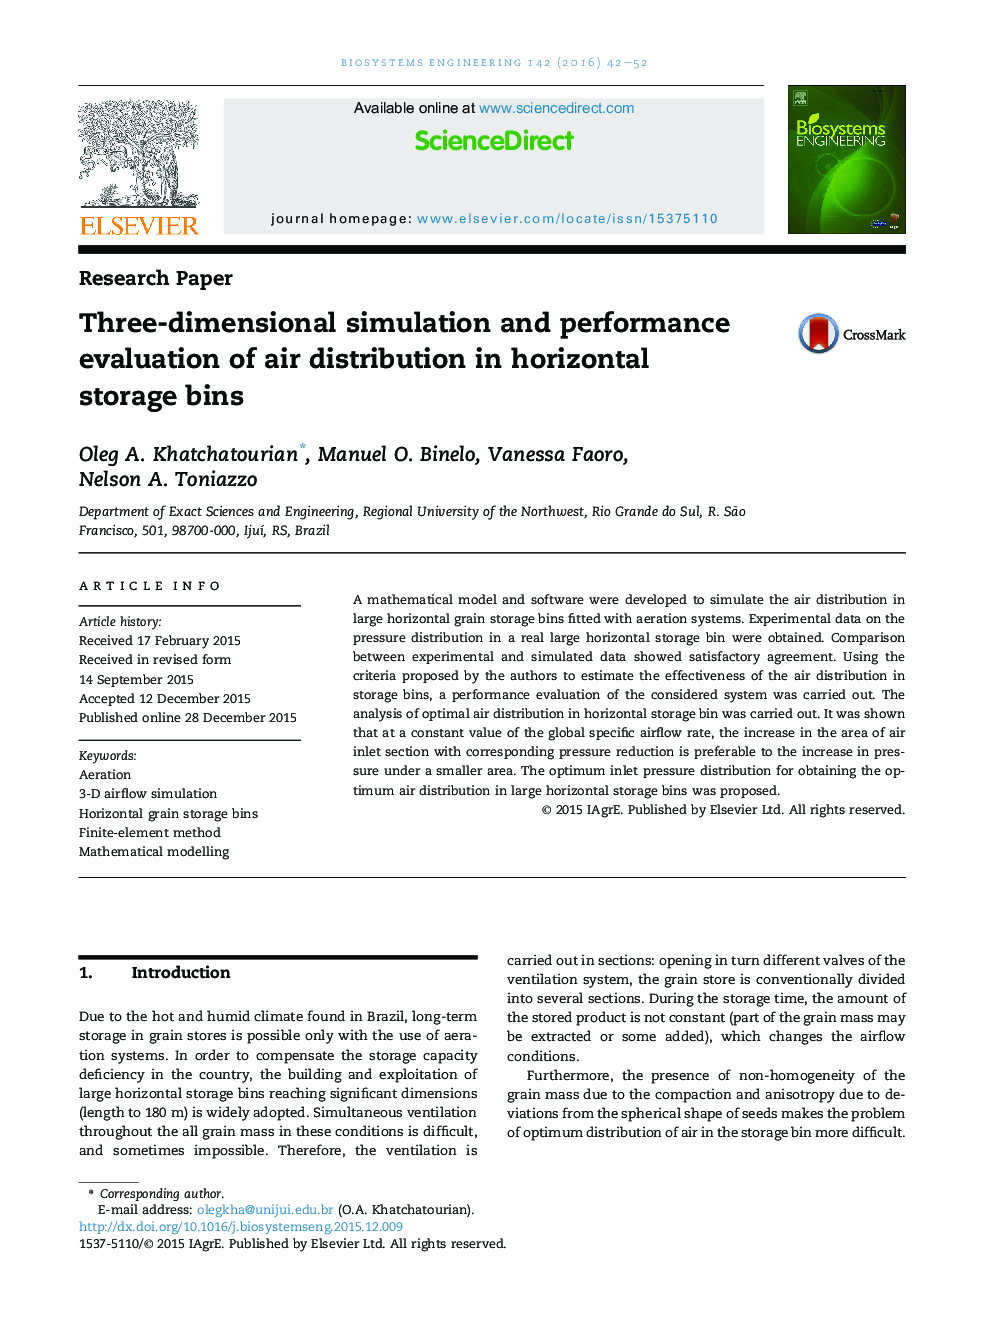 Three-dimensional simulation and performance evaluation of air distribution in horizontal storage bins